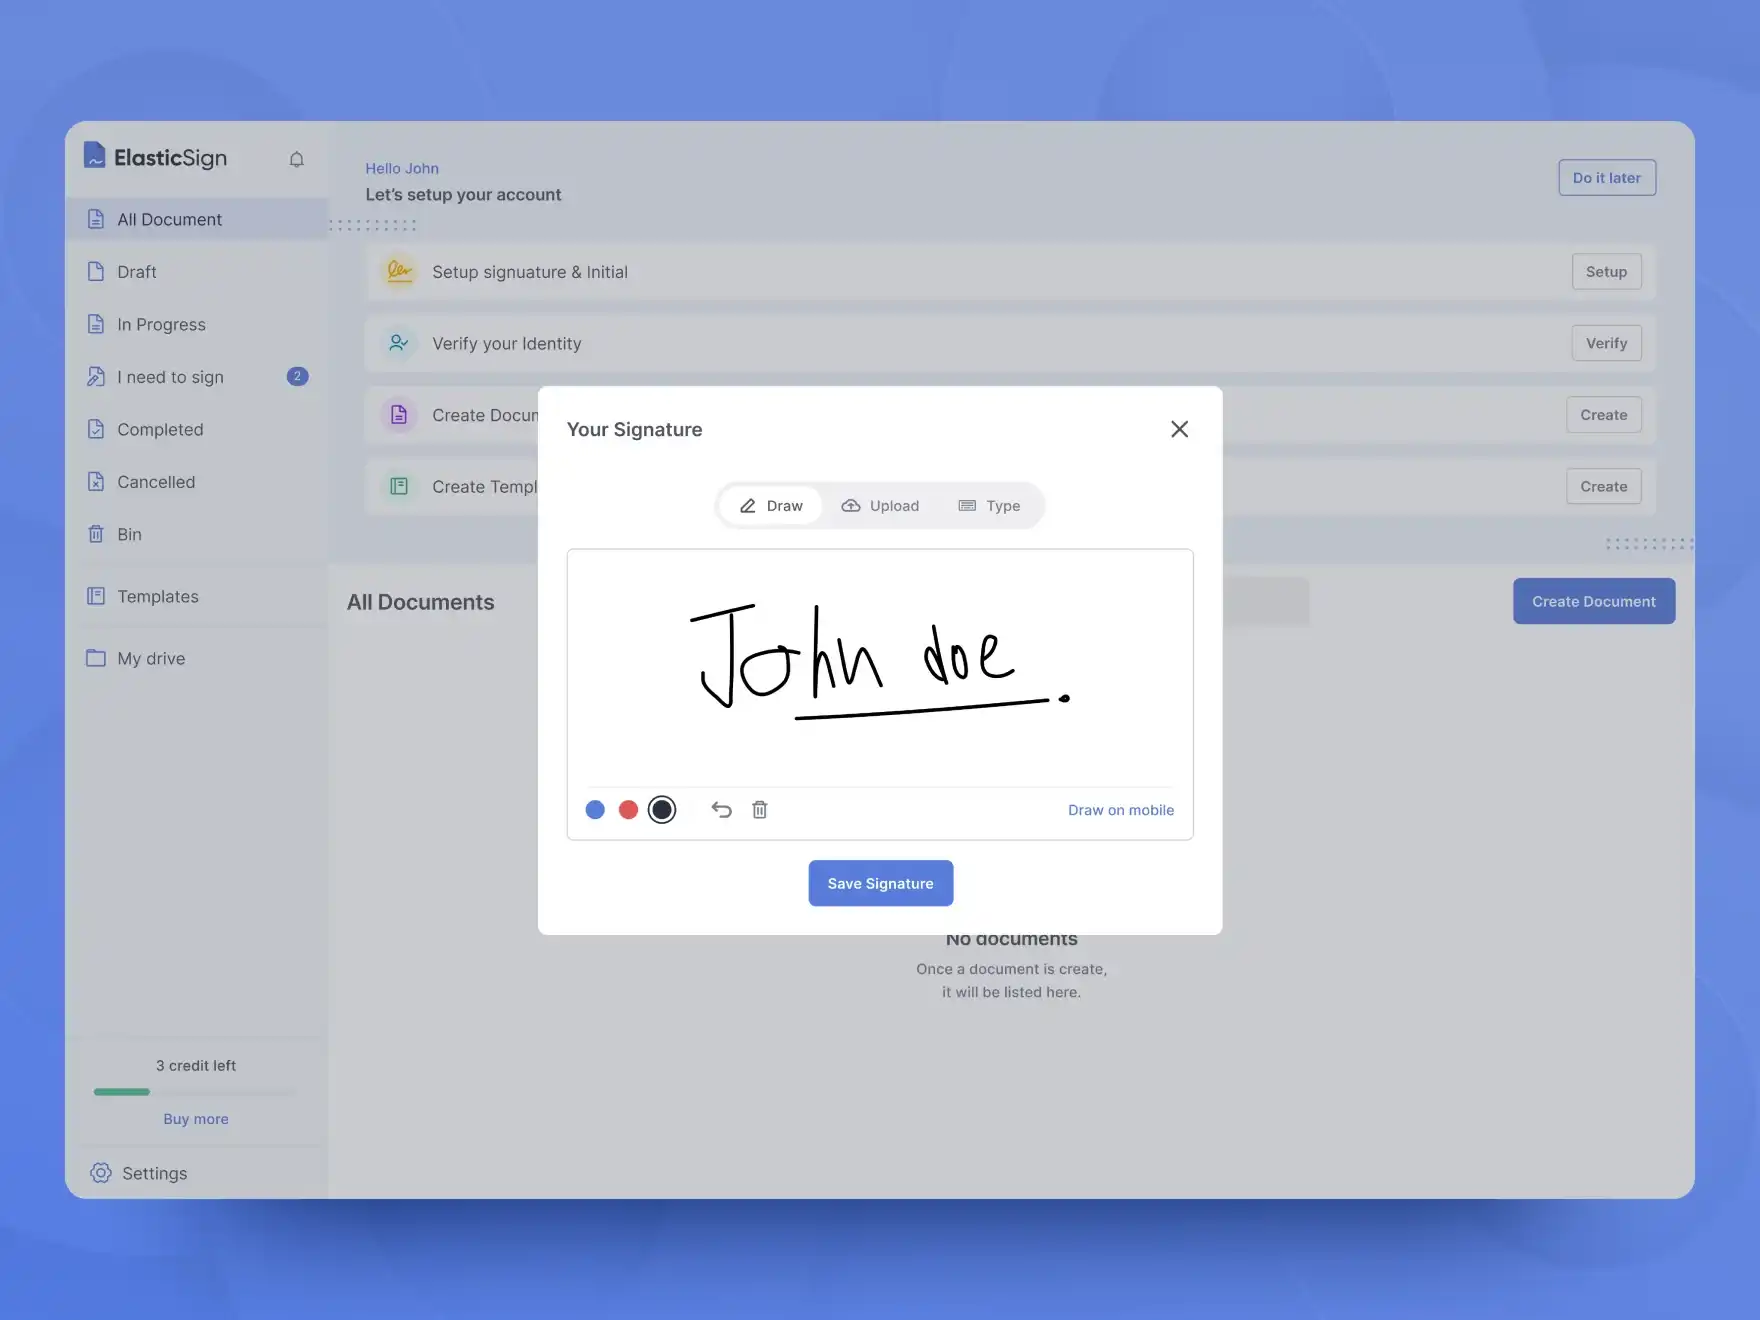 UI Screen to draw, upload or type your own signature